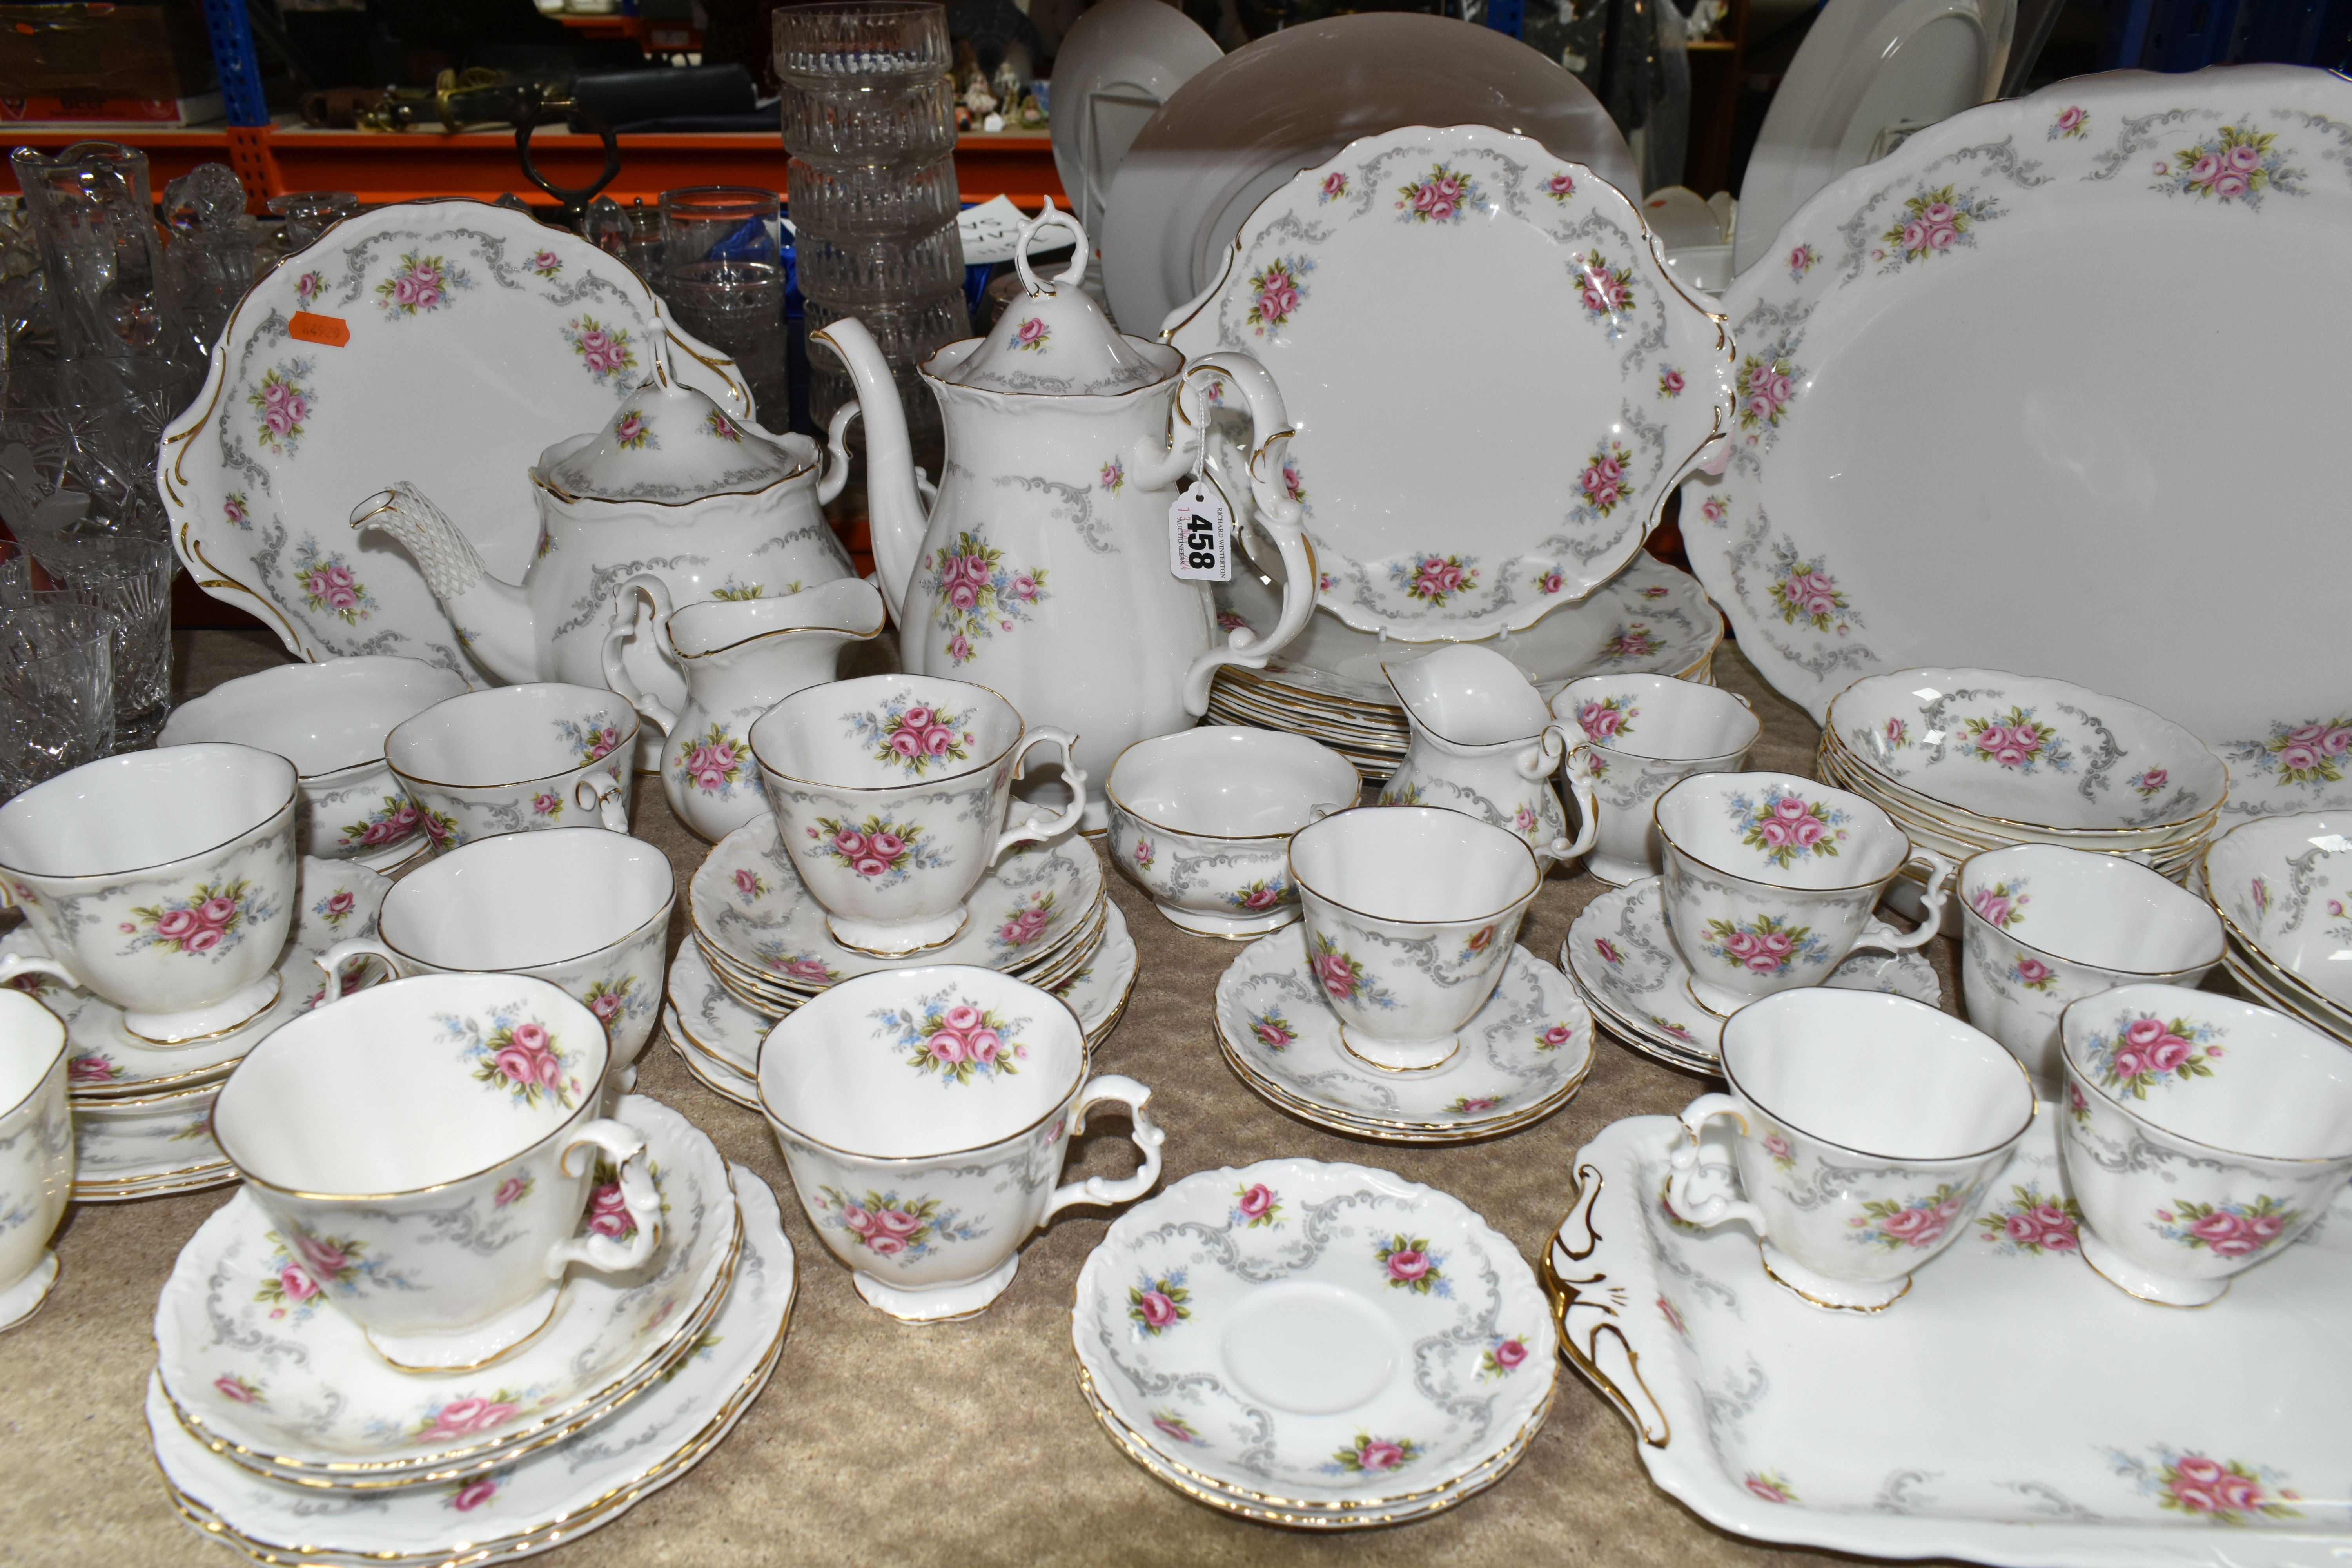 ROYAL ALBERT 'TRANQUILITY' DINNER SET, including six coffee cups and saucers, six tea cups and